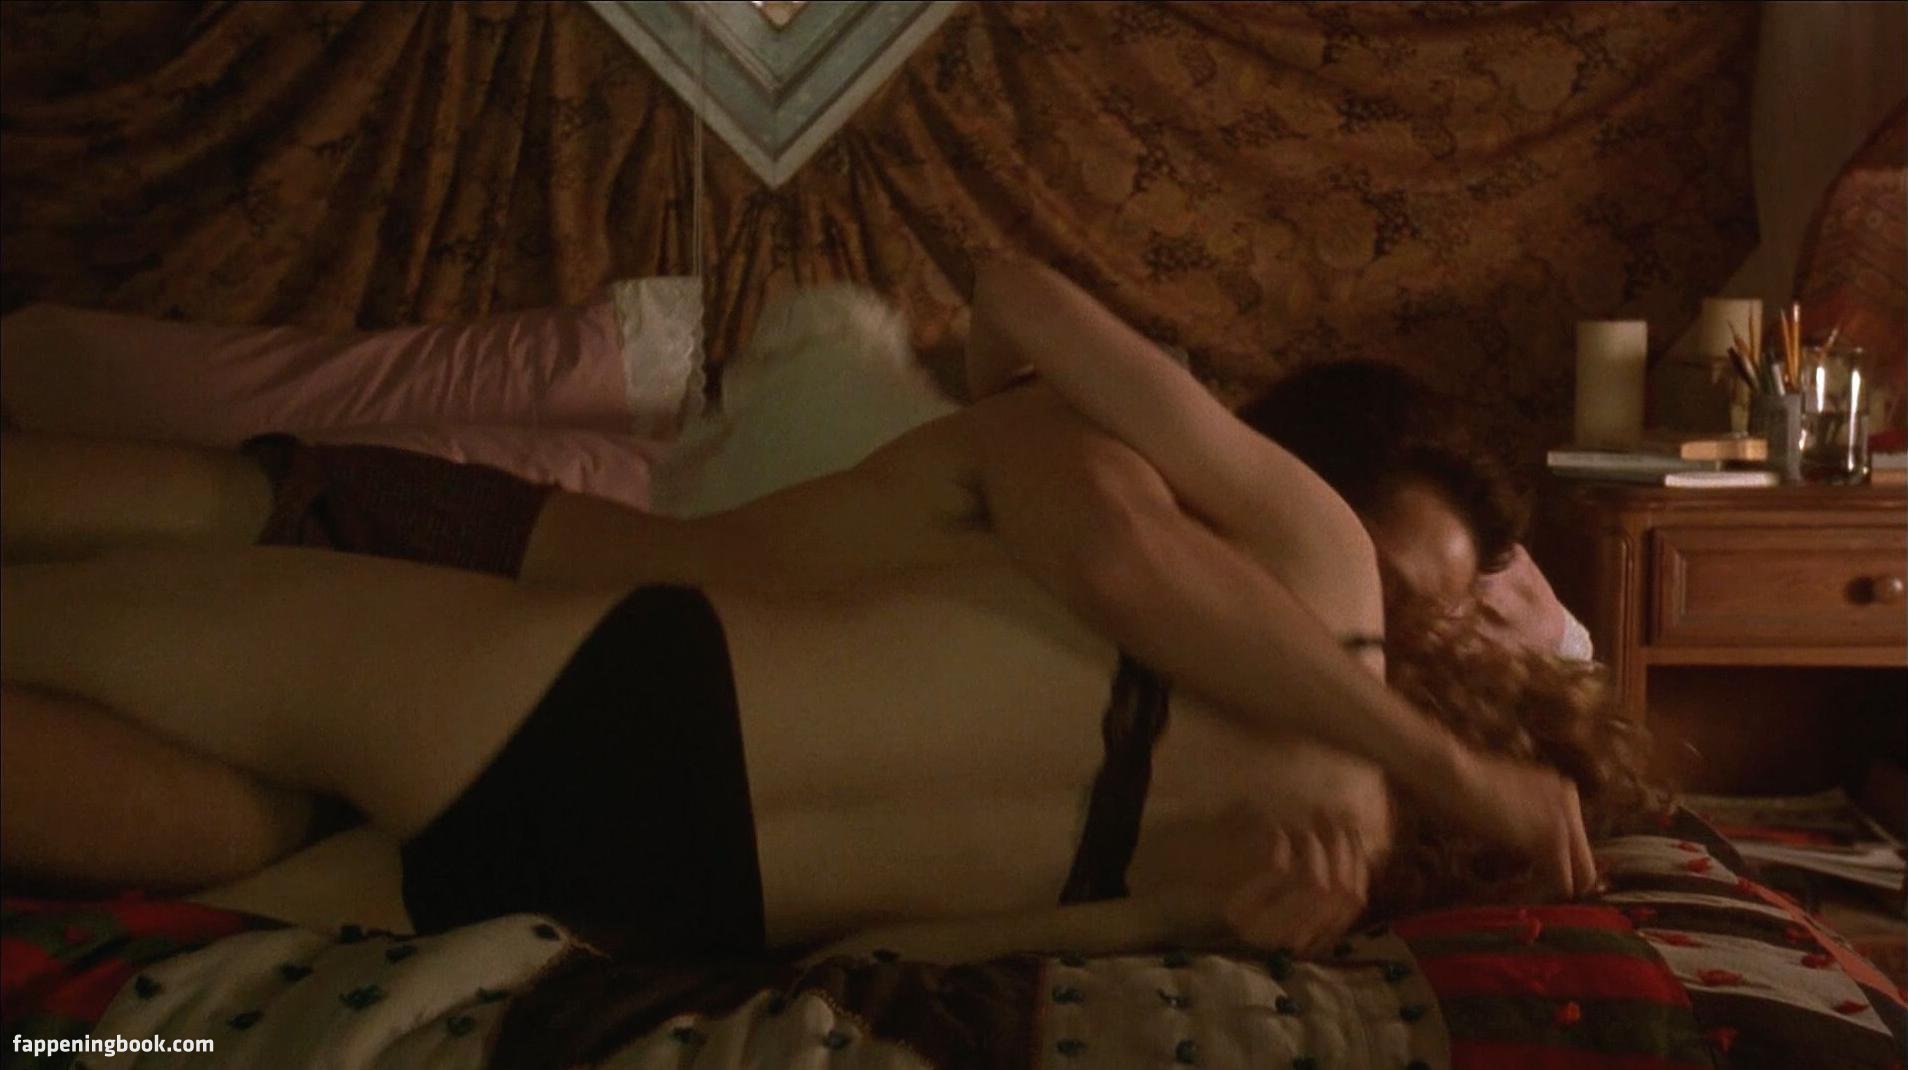 Kyra Sedgwick Nude, The Fappening - Photo #321674 - FappeningBook.